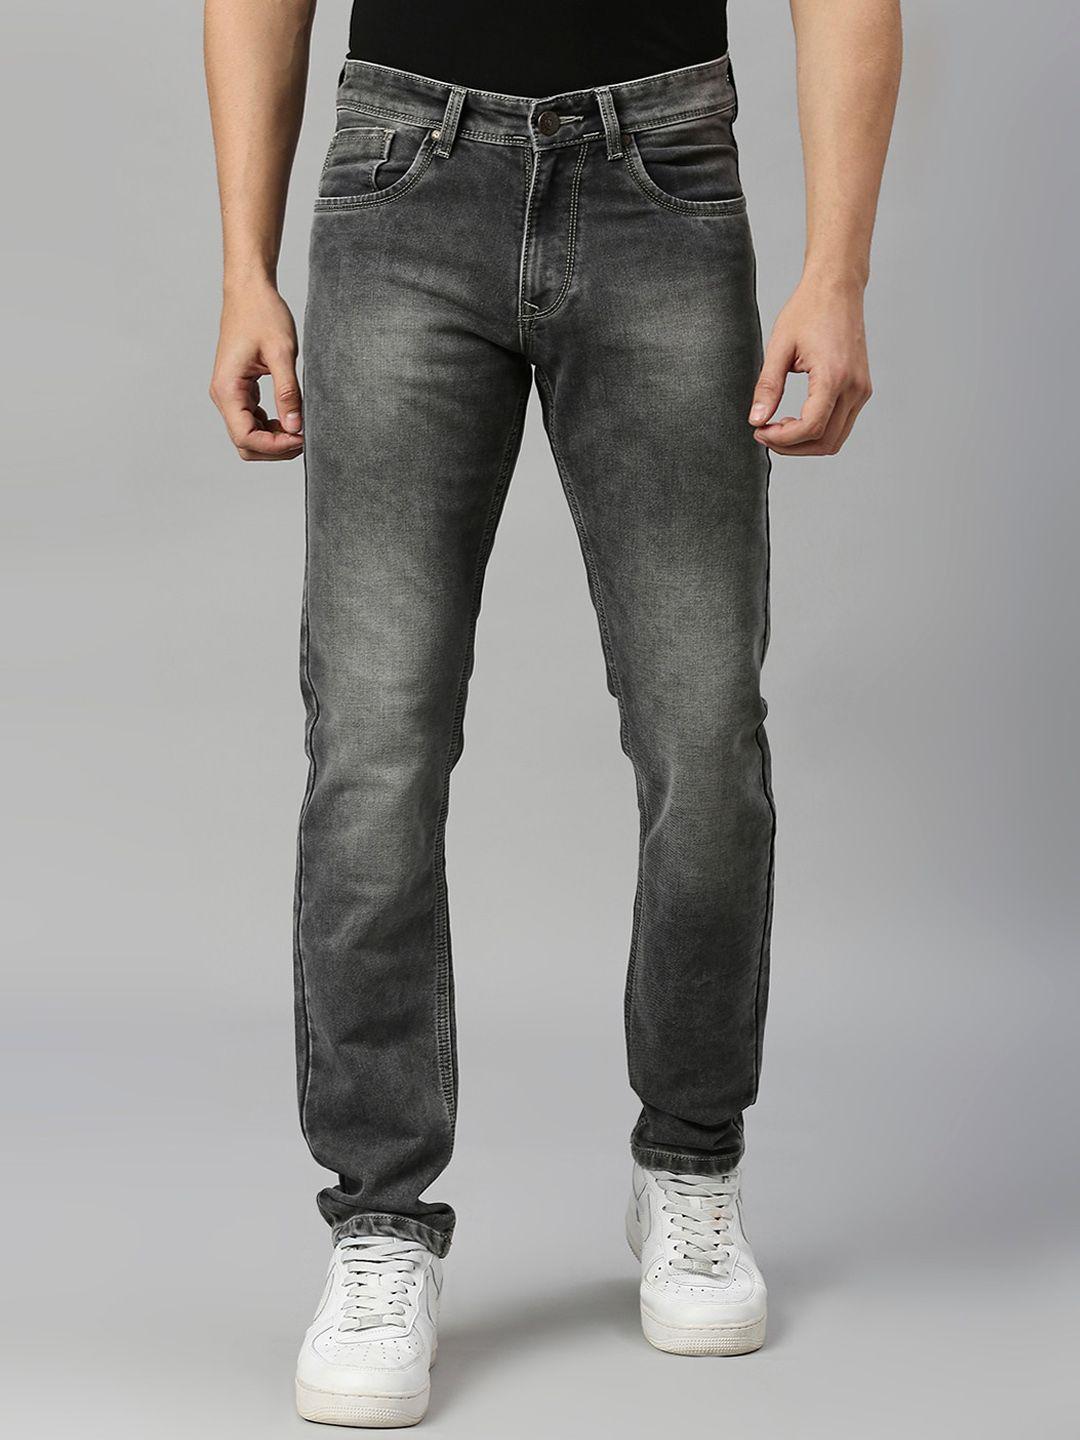 hj hasasi men relaxed fit heavy fade stretchable jeans